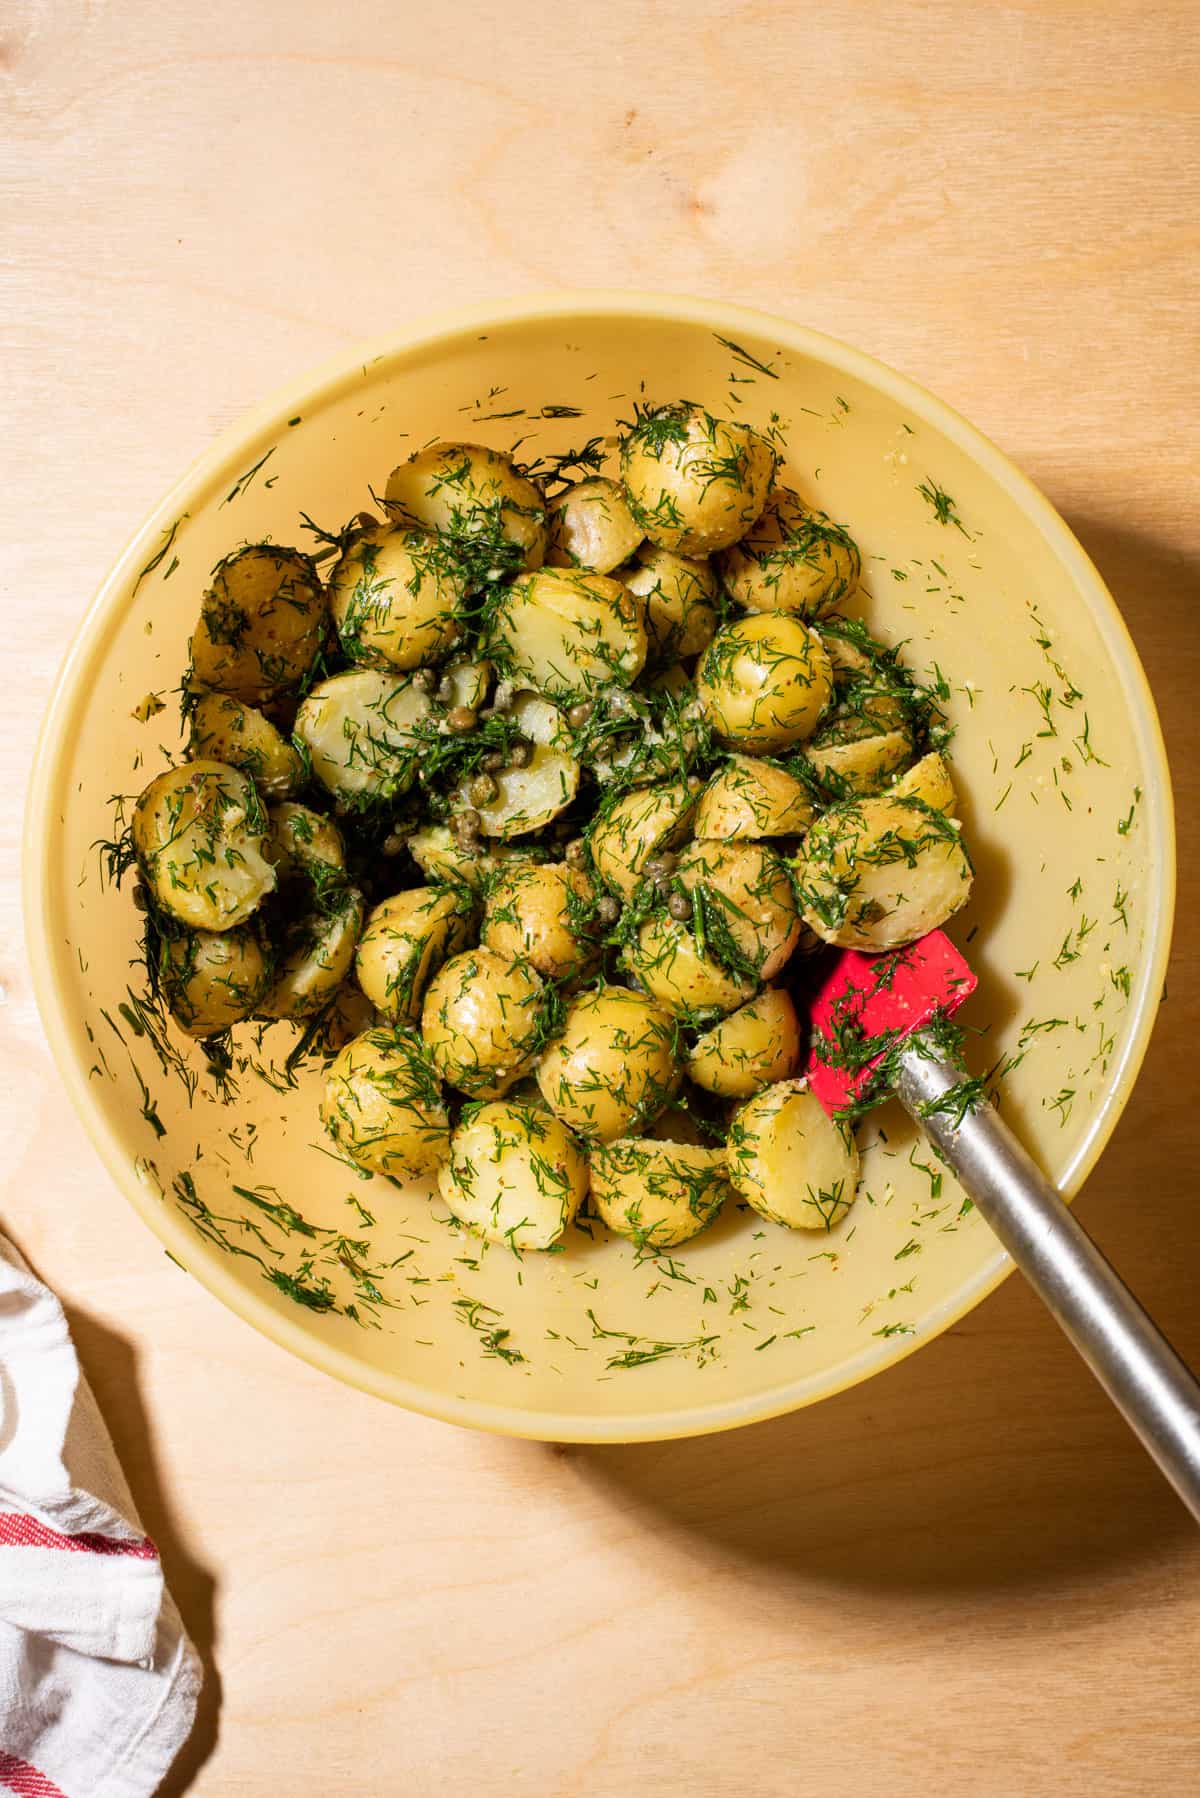 Boiled baby potatoes tossed with dill and olive oil.